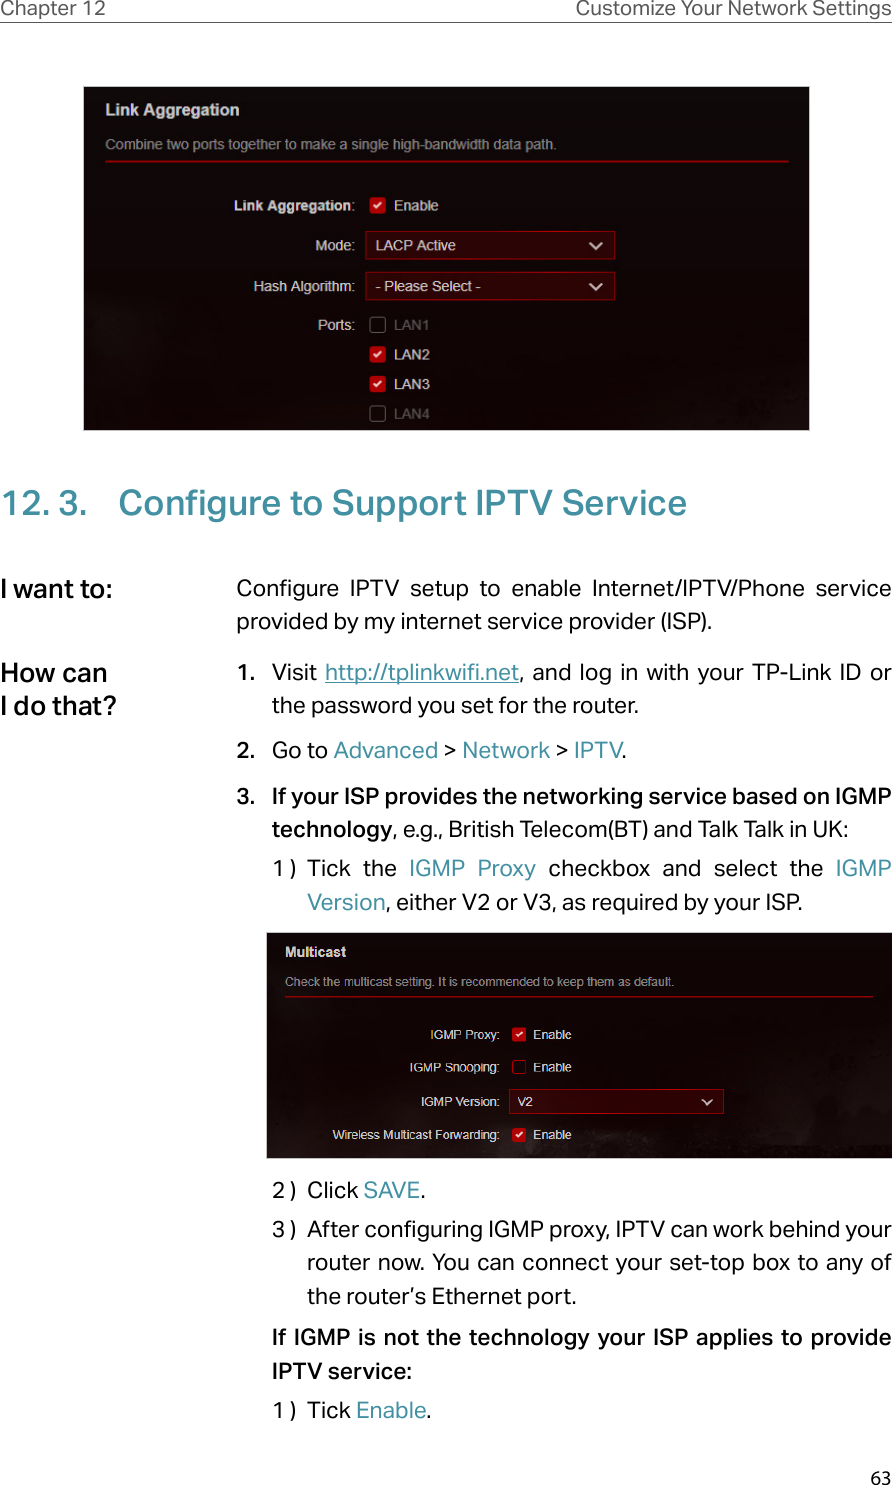 63Chapter 12 Customize Your Network Settings12. 3.  Configure to Support IPTV ServiceConfigure IPTV setup to enable Internet/IPTV/Phone service provided by my internet service provider (ISP).1.  Visit http://tplinkwifi.net, and log in with your TP-Link ID or the password you set for the router.2.  Go to Advanced &gt; Network &gt; IPTV.3.  If your ISP provides the networking service based on IGMP technology, e.g., British Telecom(BT) and Talk Talk in UK:1 )  Tick the IGMP Proxy  checkbox and select the IGMP Version, either V2 or V3, as required by your ISP.2 )  Click SAVE .3 )  After configuring IGMP proxy, IPTV can work behind your router now. You can connect your set-top box to any of the router’s Ethernet port.If IGMP is not the technology your ISP applies to provide IPTV service:1 )  Tick Enable.I want to:How can I do that?